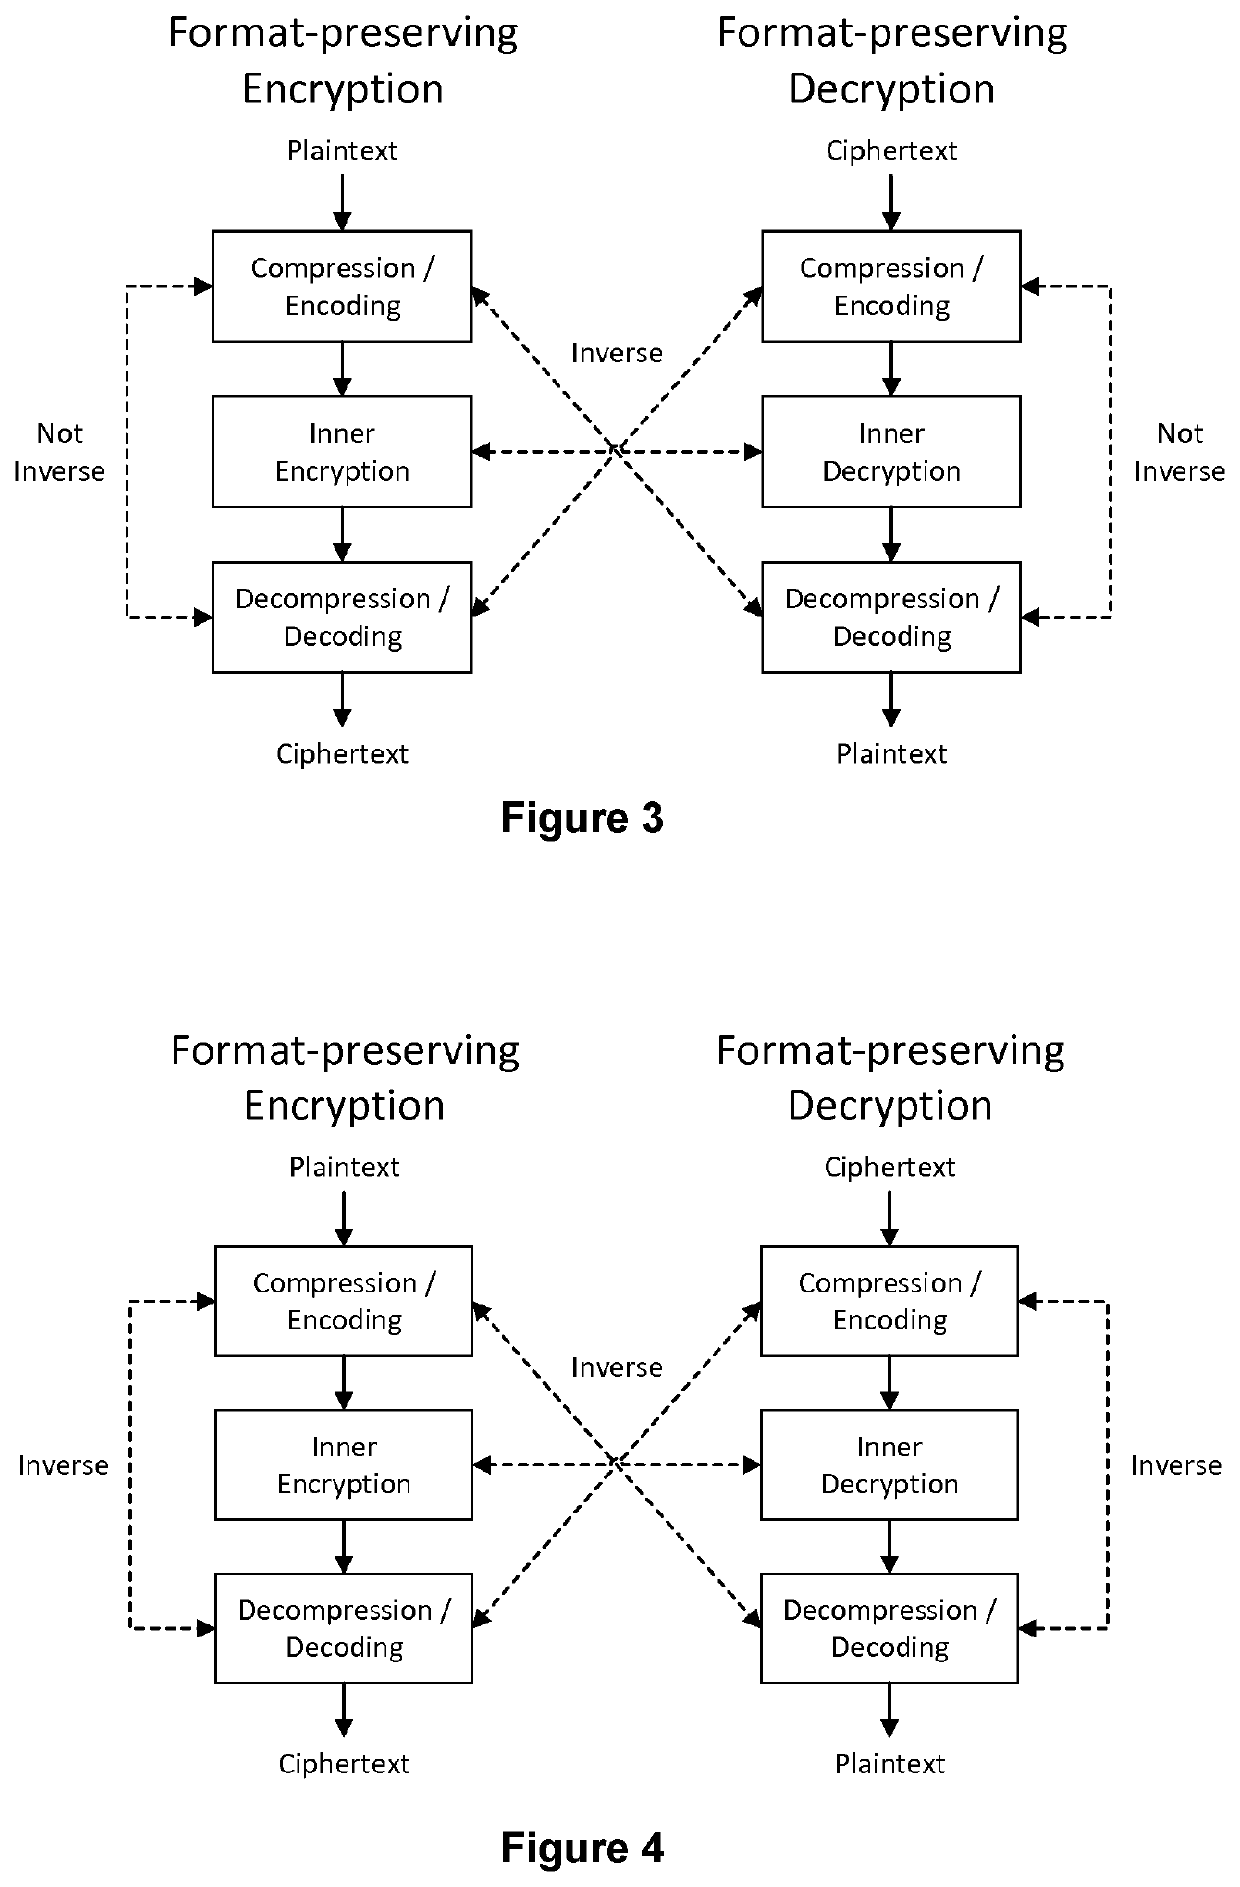 A computer-implemented method of performing format-preserving encryption of a data object of variable size